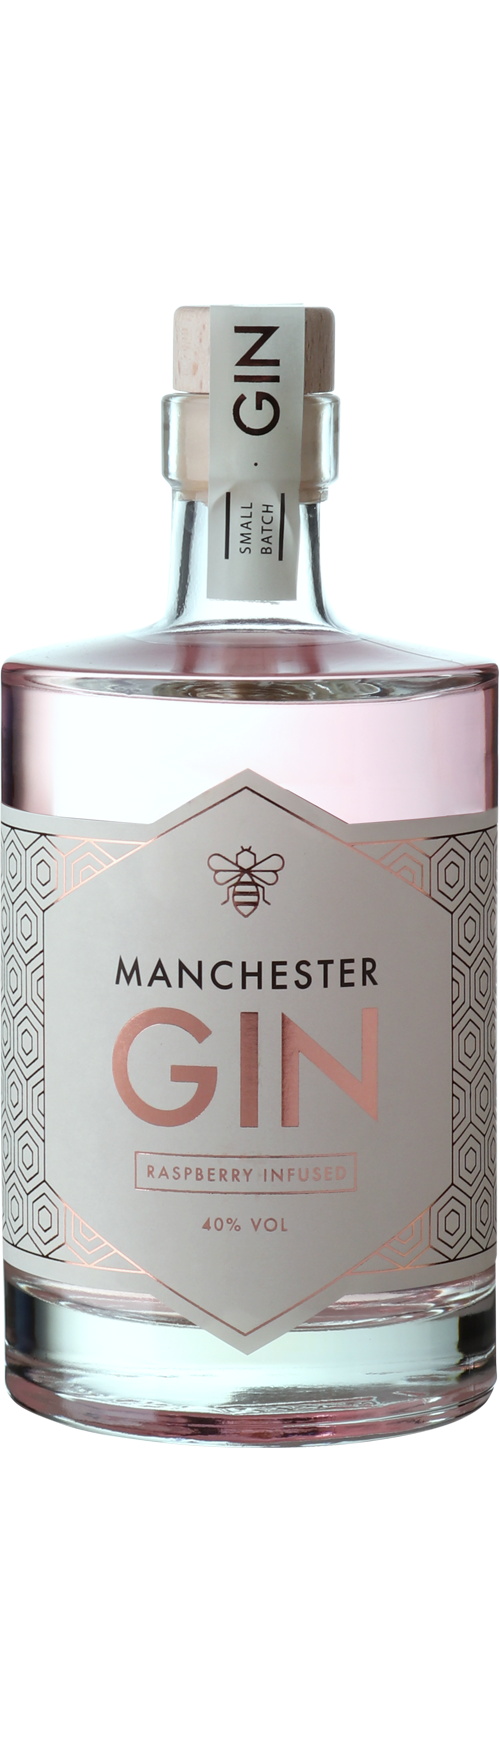 MANCHESTER RASPBERRY INFUSED GIN, 1 fl. Gin 2 fl. Tonic